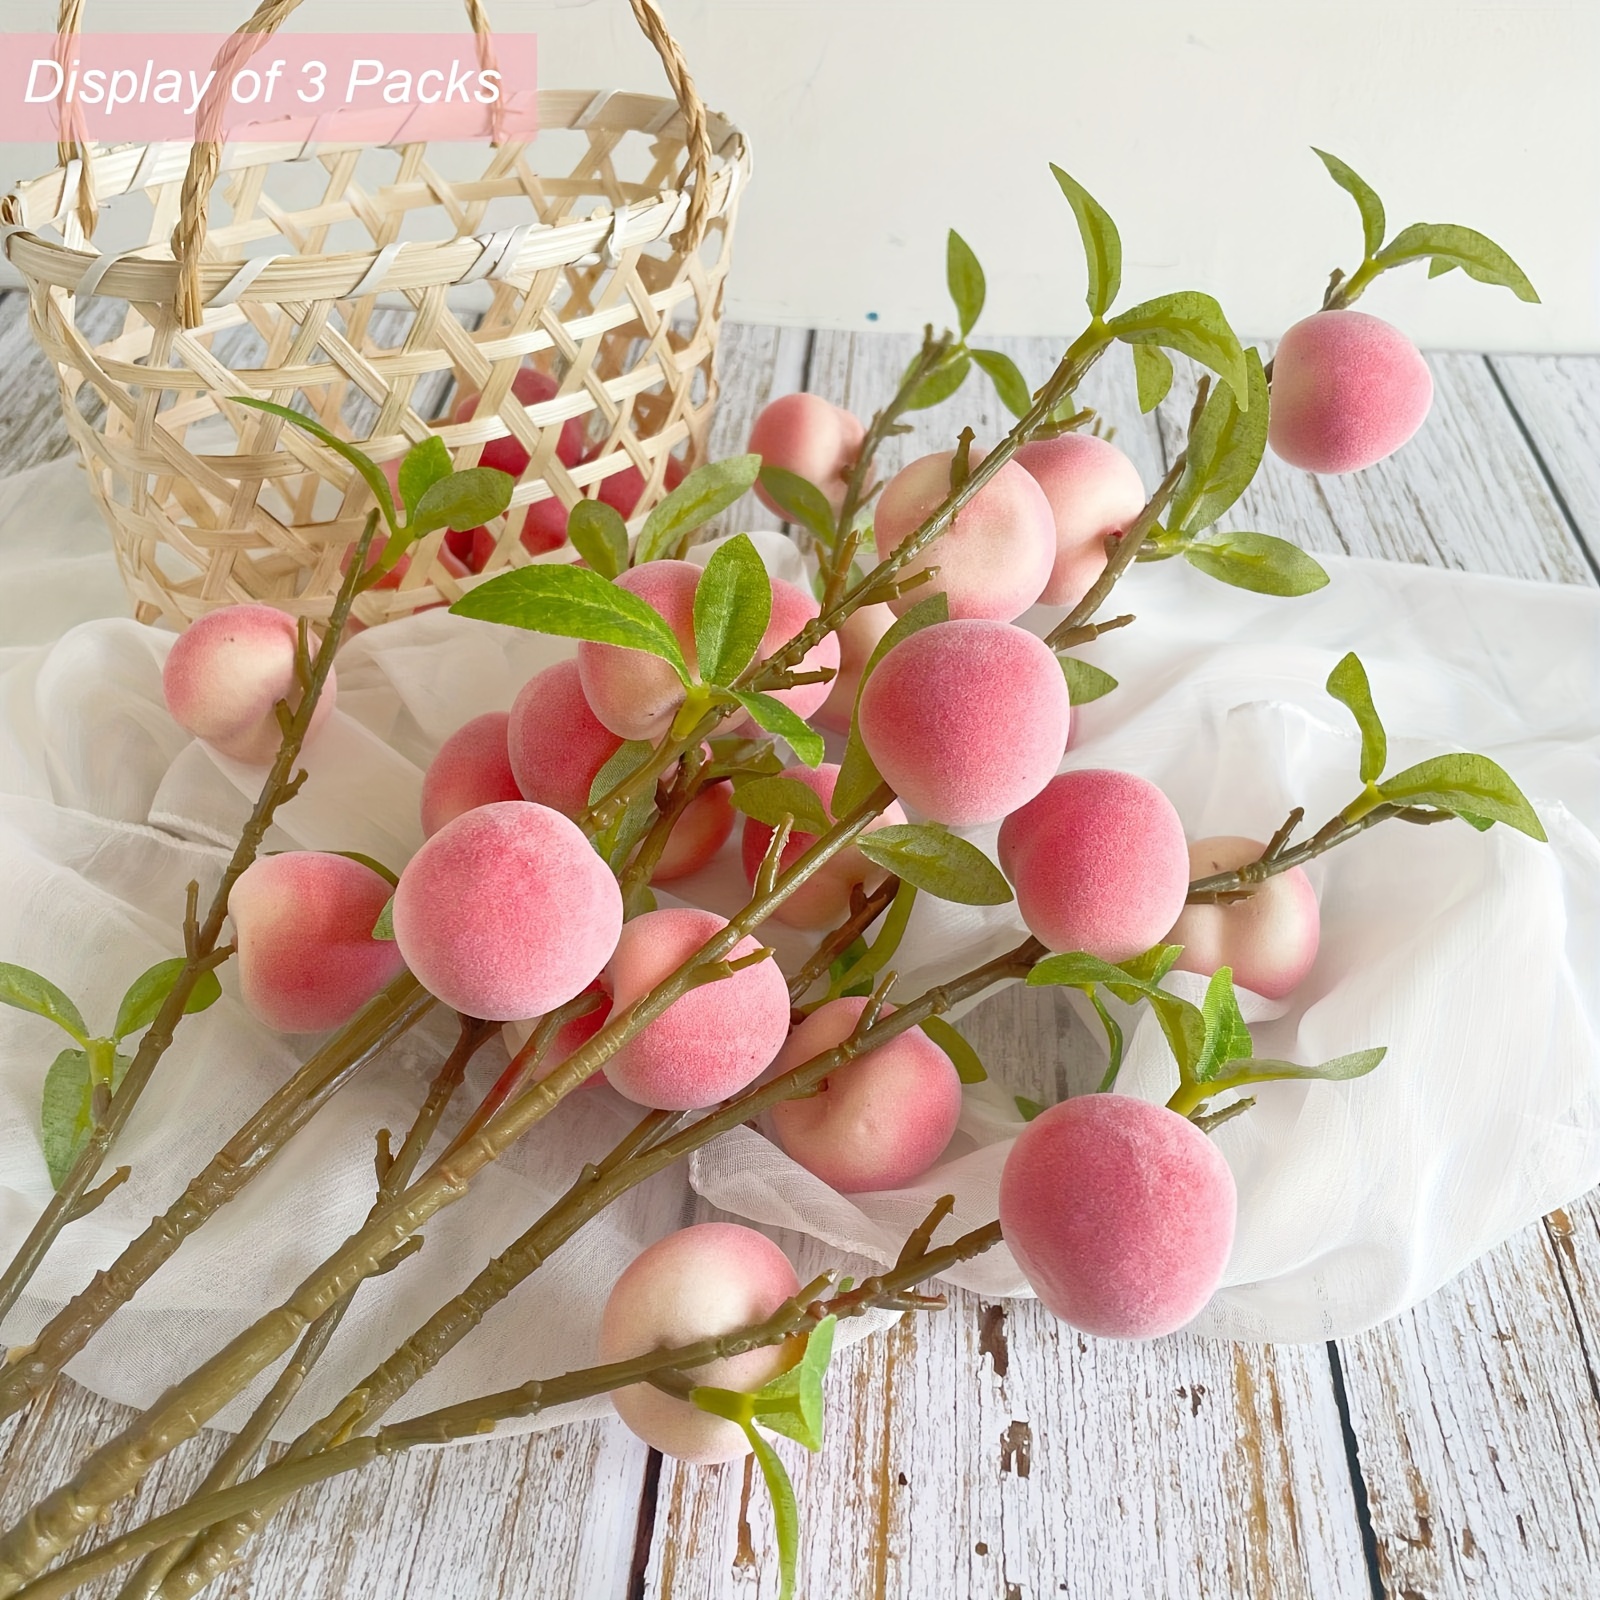 

Charming Artificial Peach Branch With Pink Foam Fruit & Green Leaves - Perfect For Home Decor, Indoor/outdoor Display, And Special Occasions